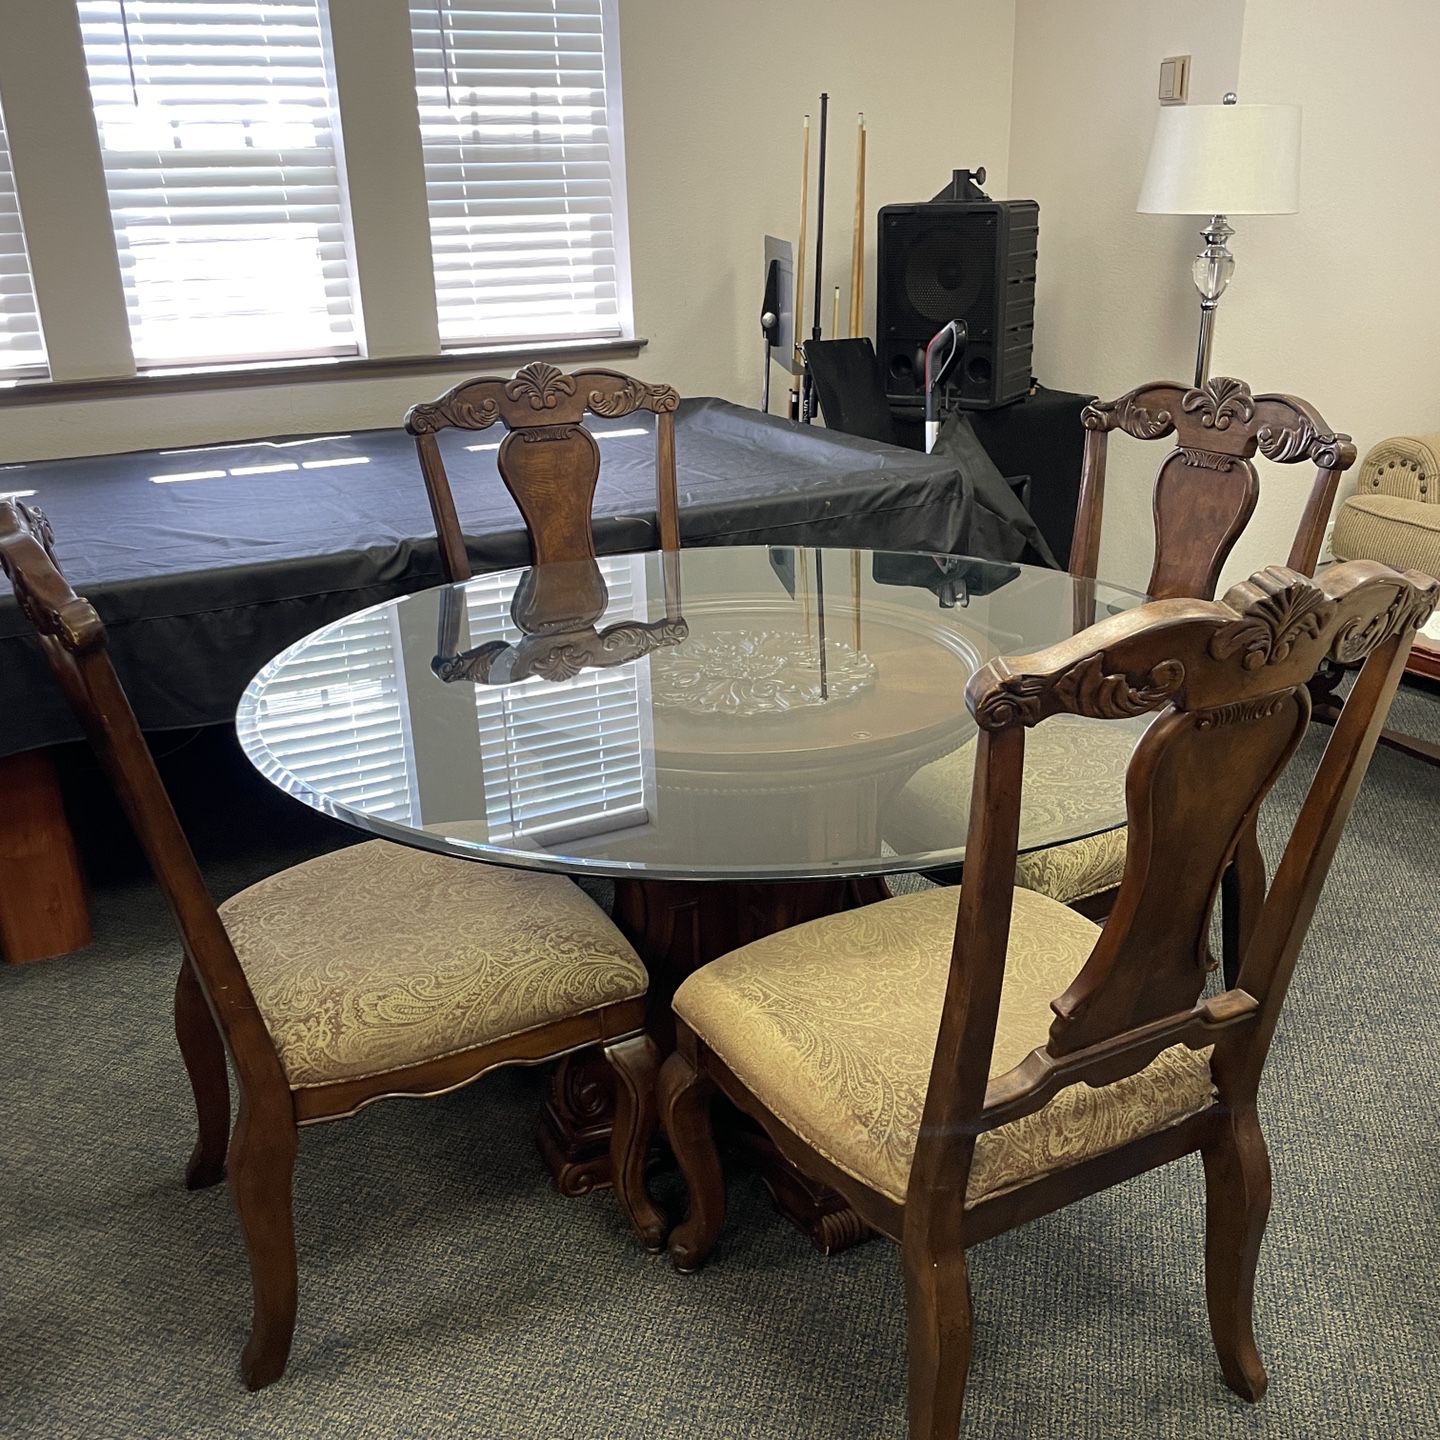 Dinning Table And Chairs * Round Glass Dinning Table 54” And 4 Chairs * Delivery Avaialble 